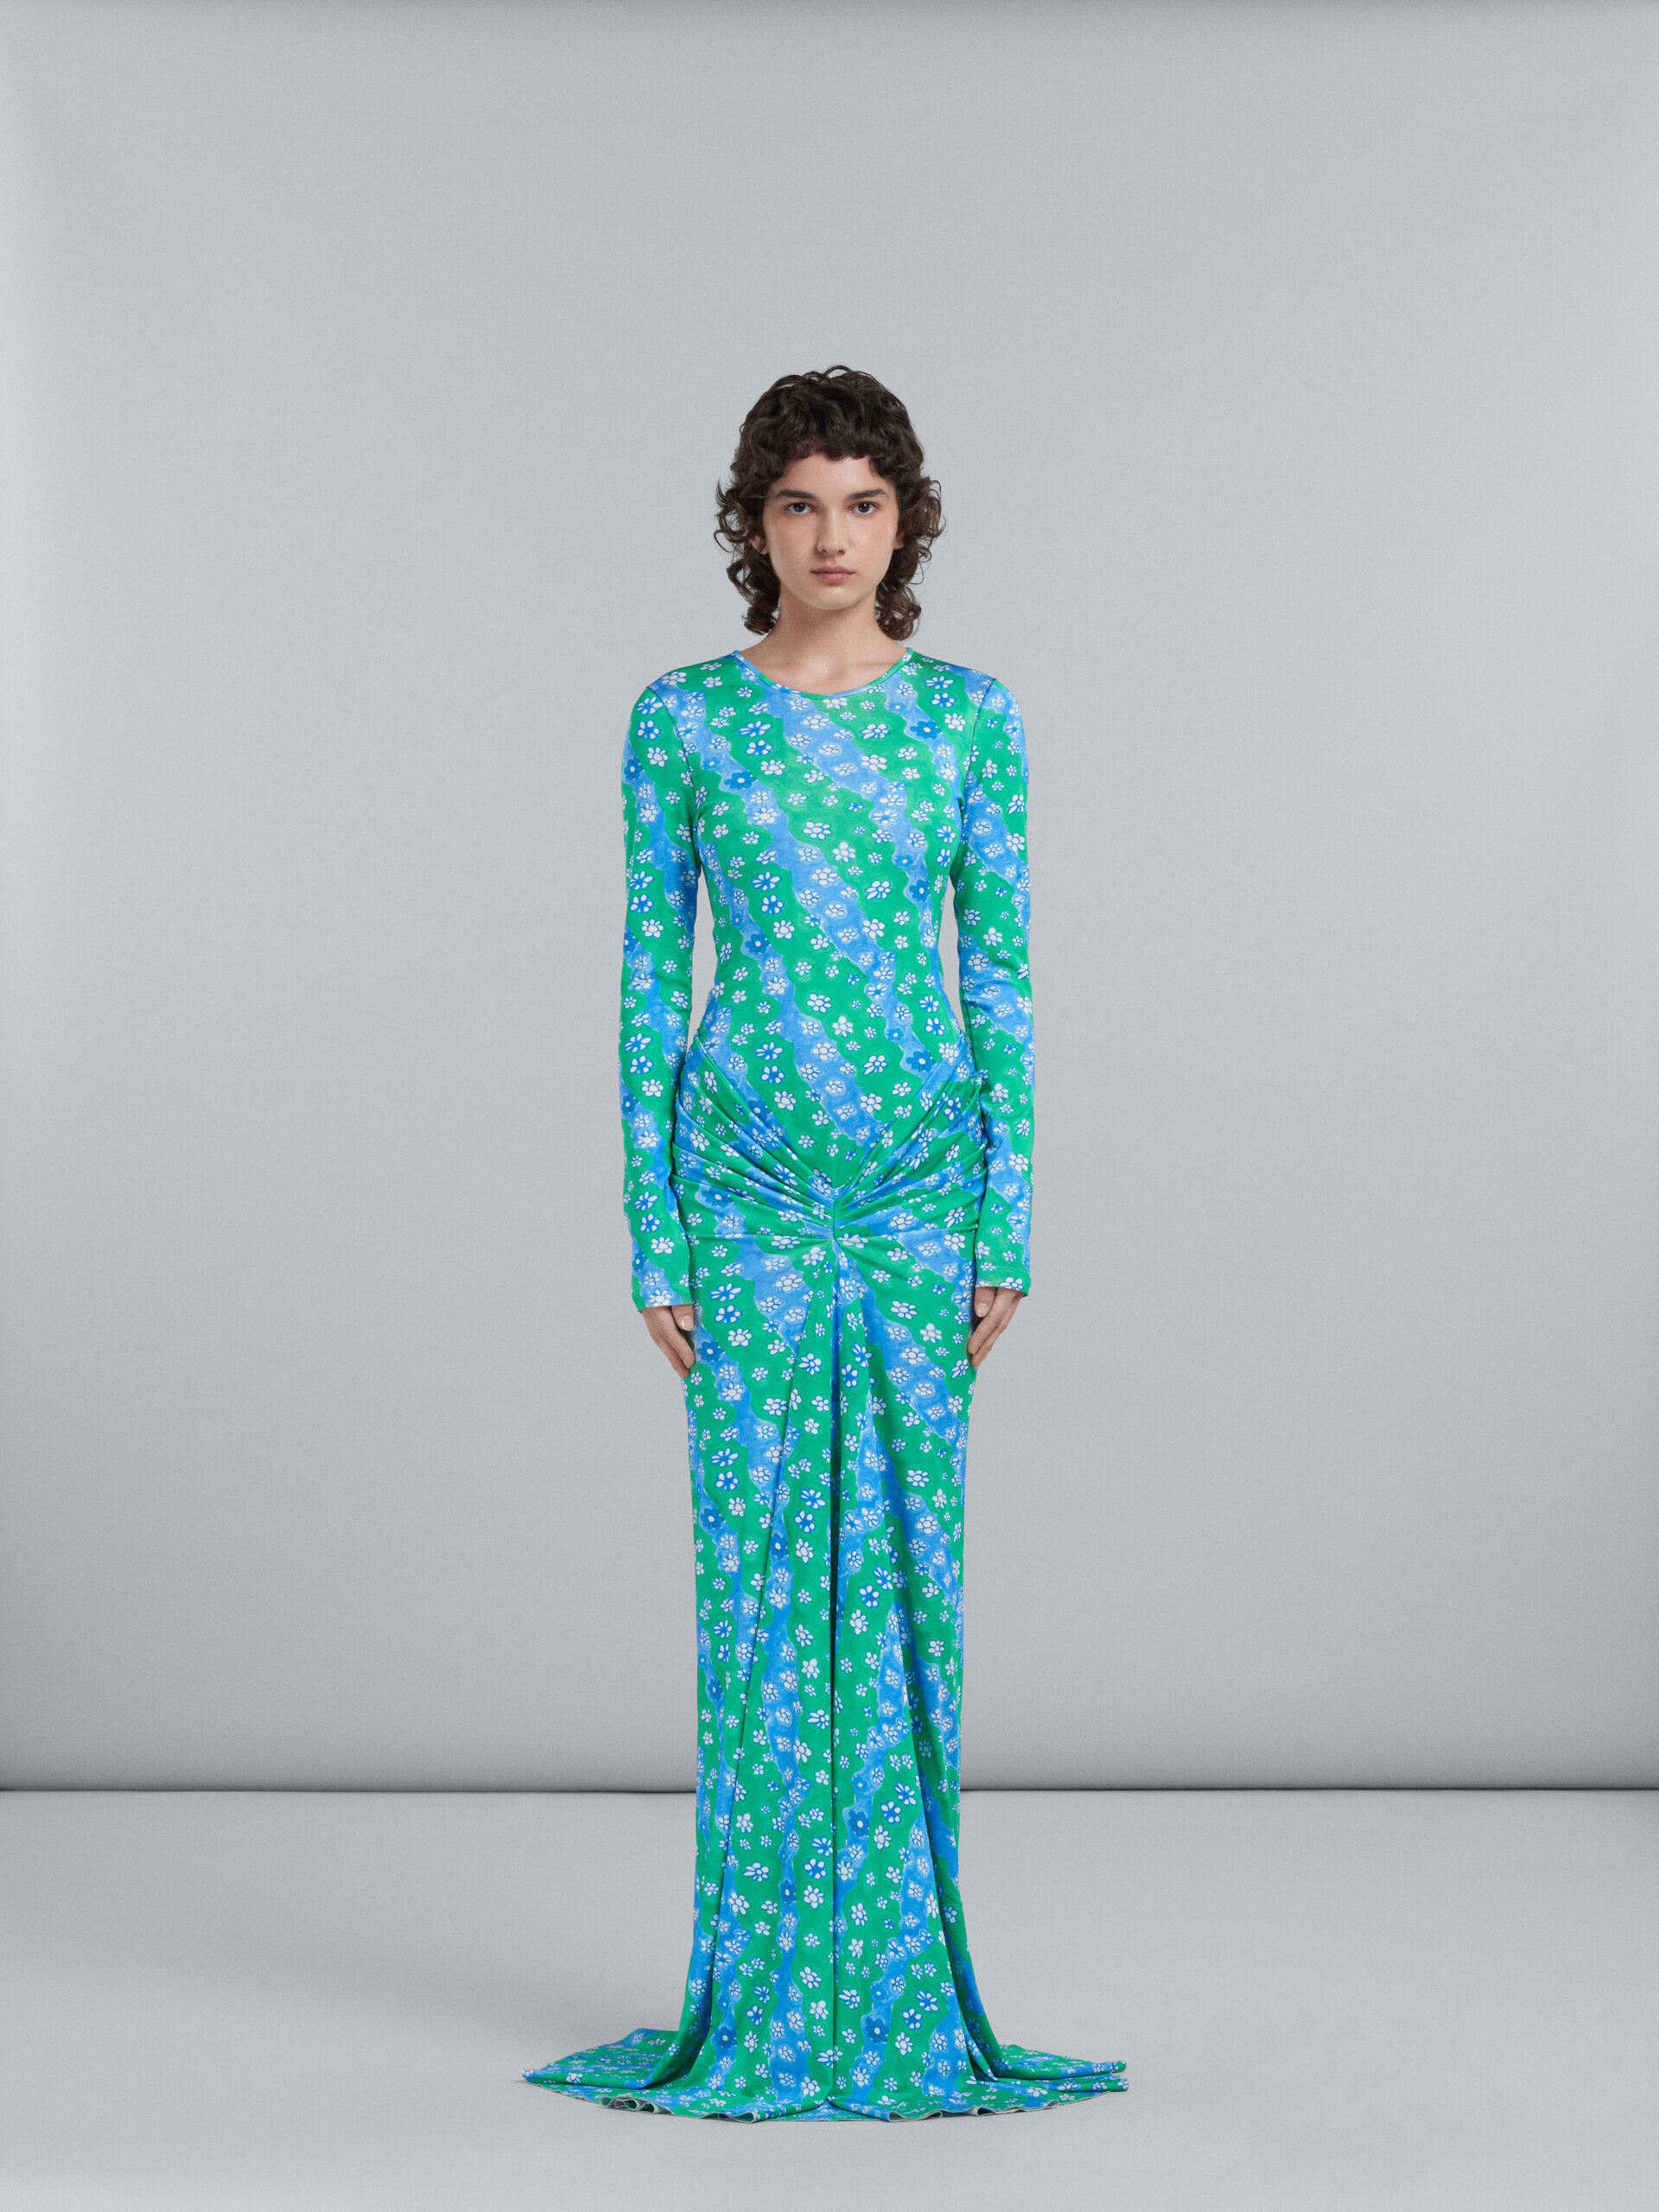 Long dress in fluid printed jersey - Dresses - Image 2